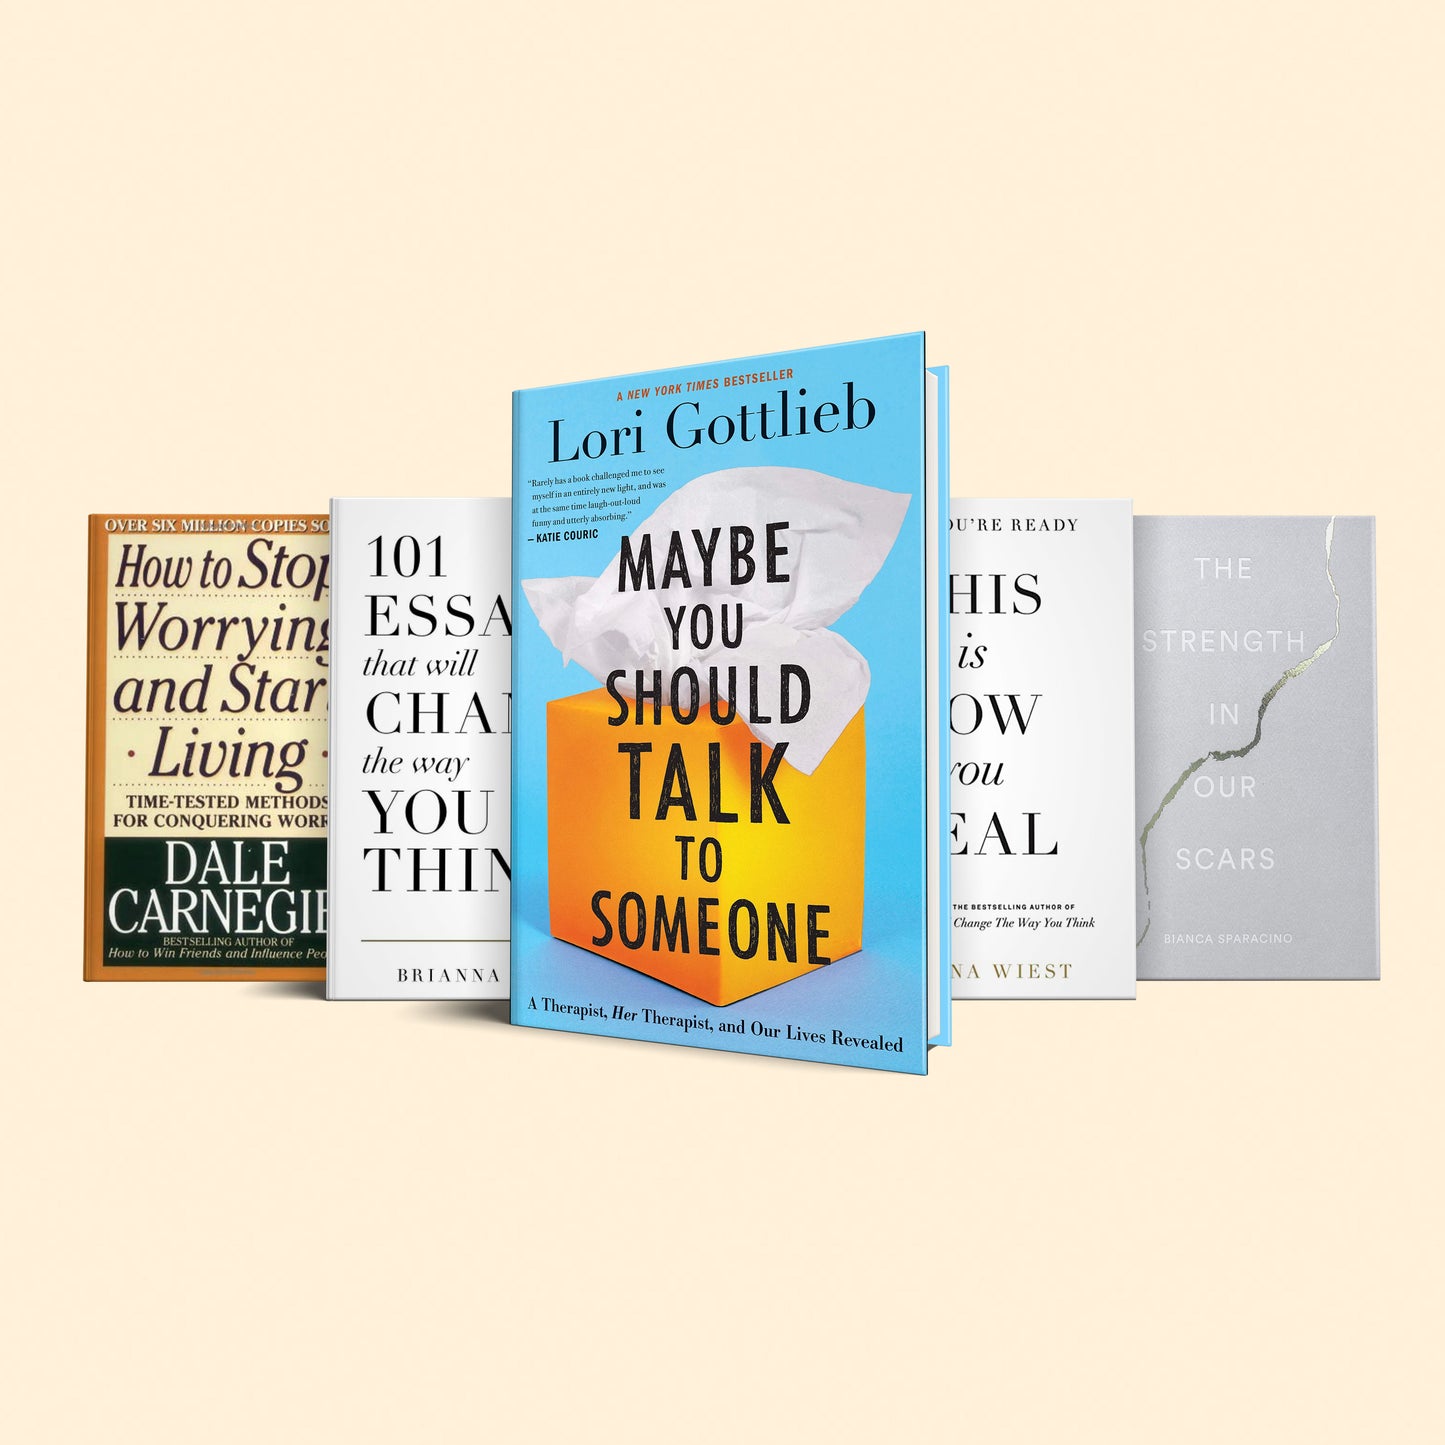 Get over your ex set of books: (Maybe you should talk to someone, When you're ready this is how you heal, 101 essays, the strength in our scars, how to stop worrying and start living)